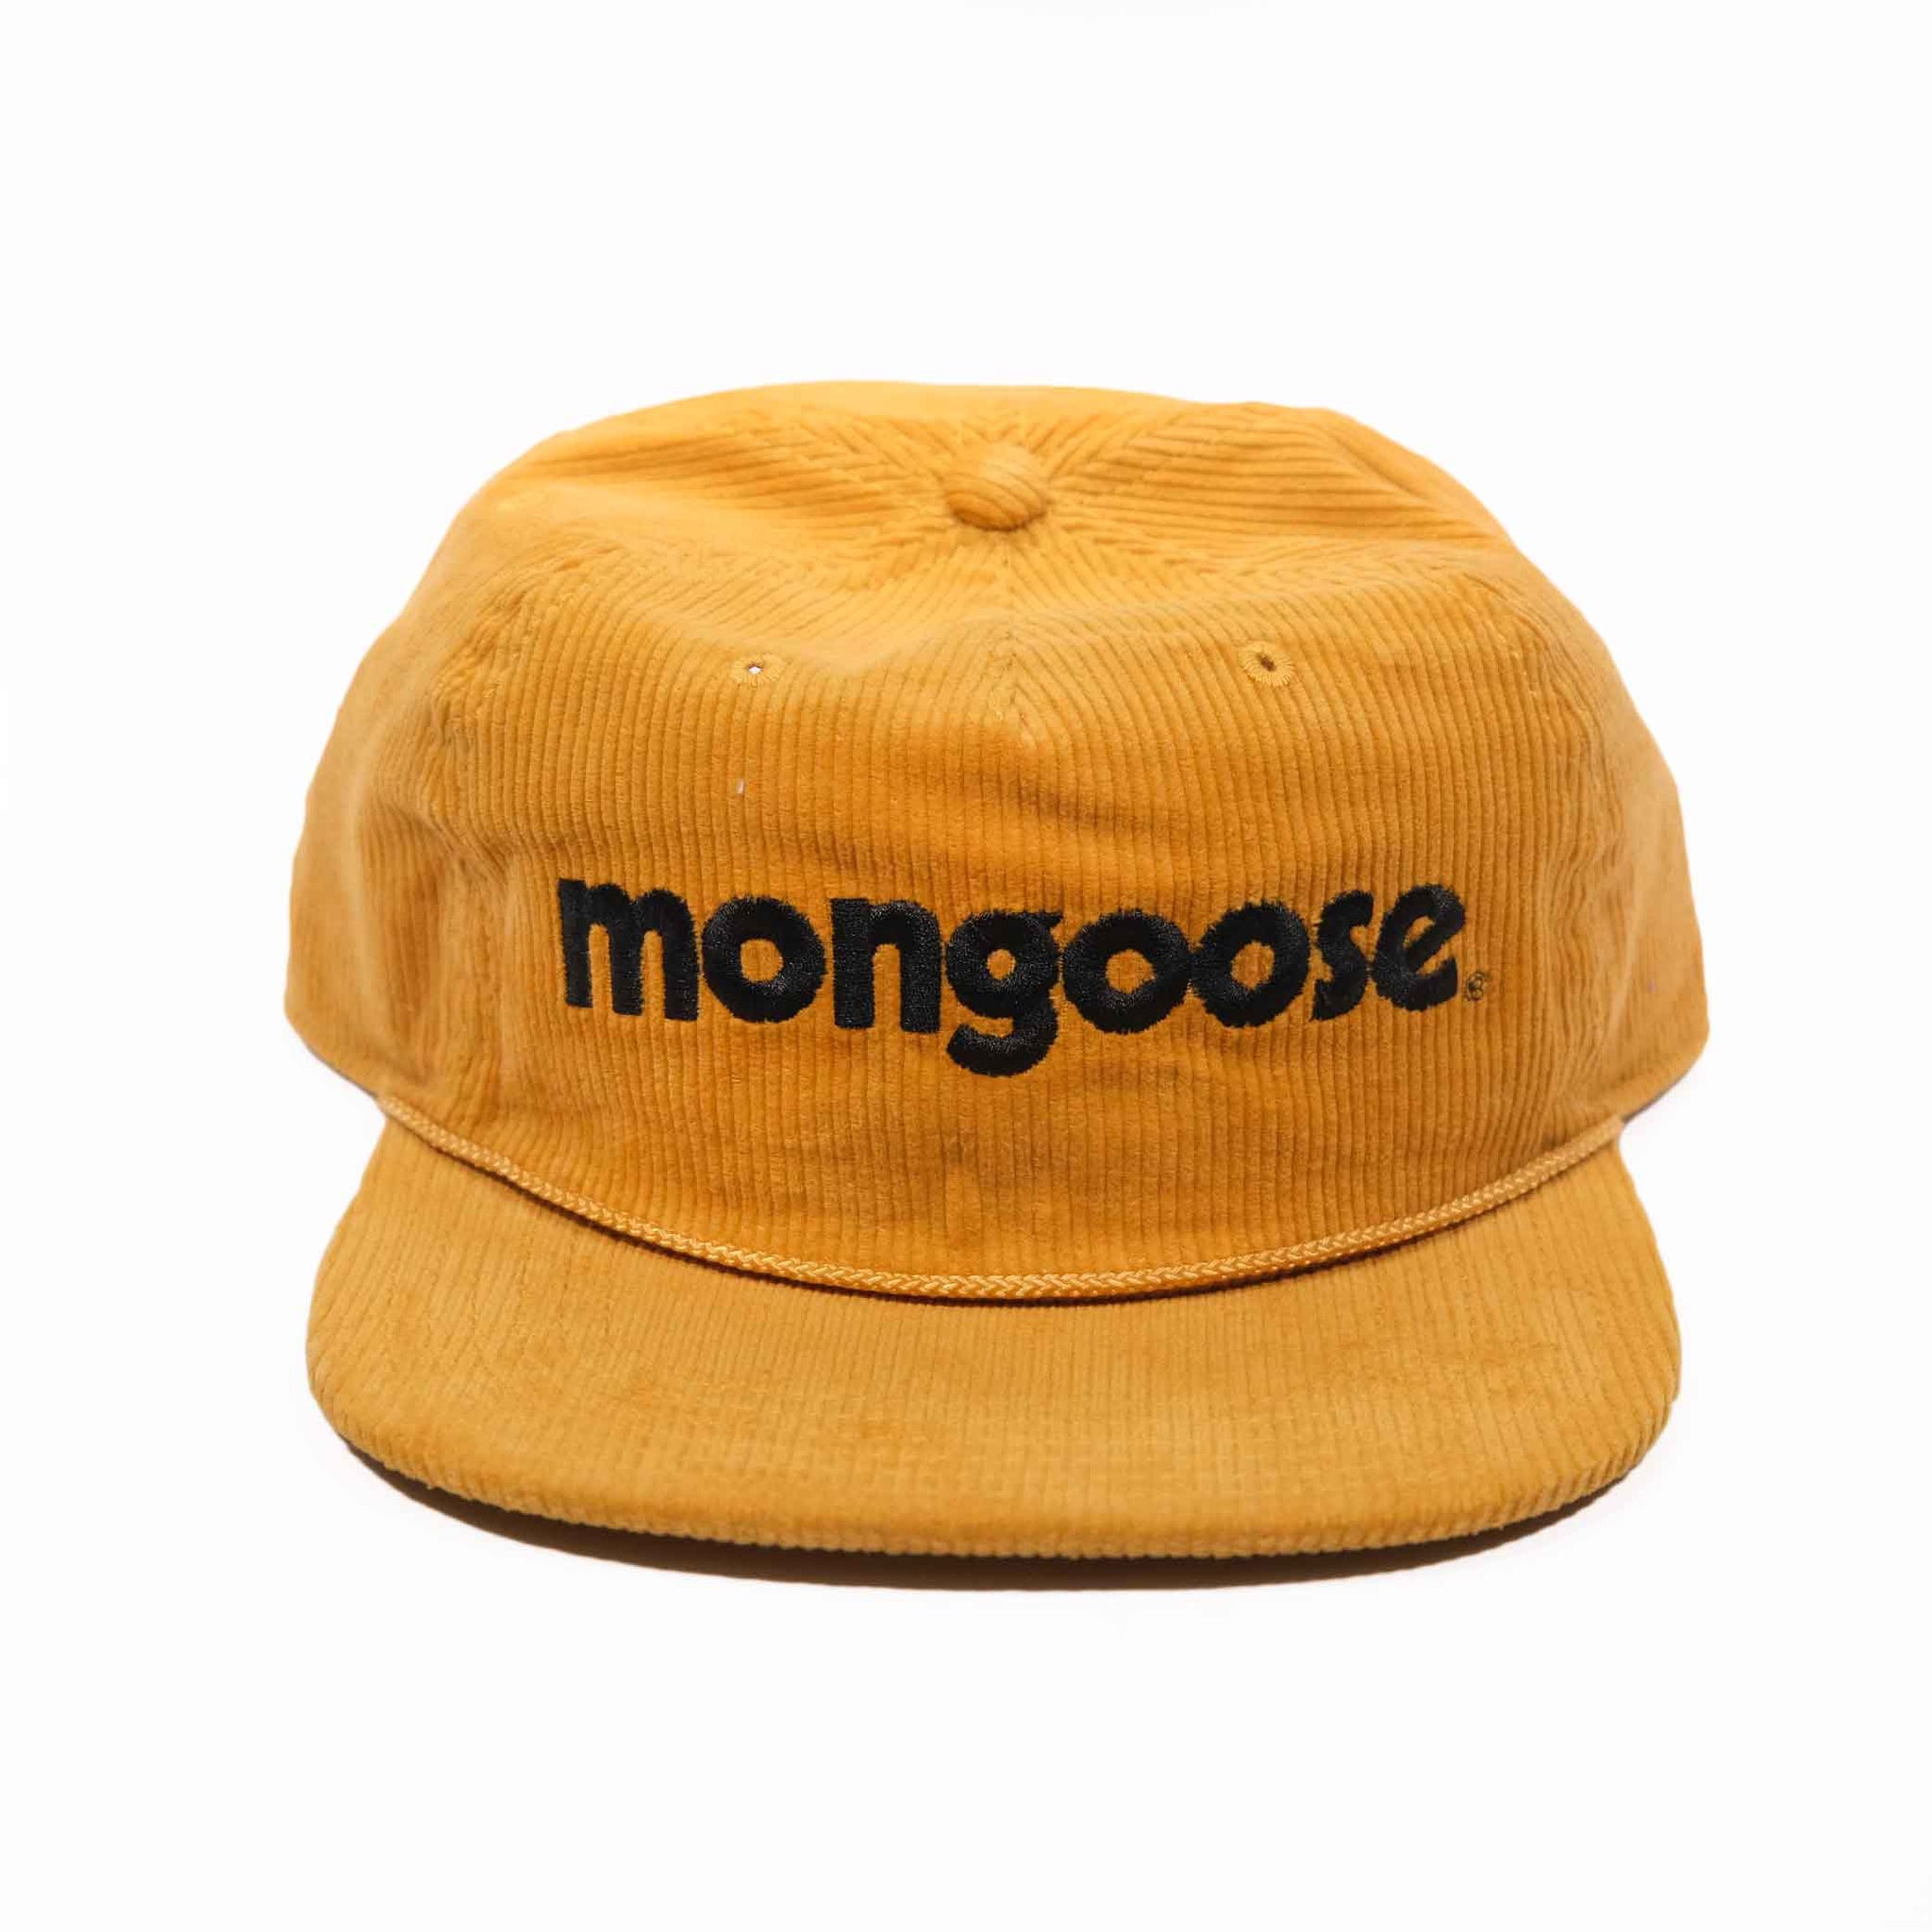 Mongoose Corduroy w/ Embroidery Hat - Mustard